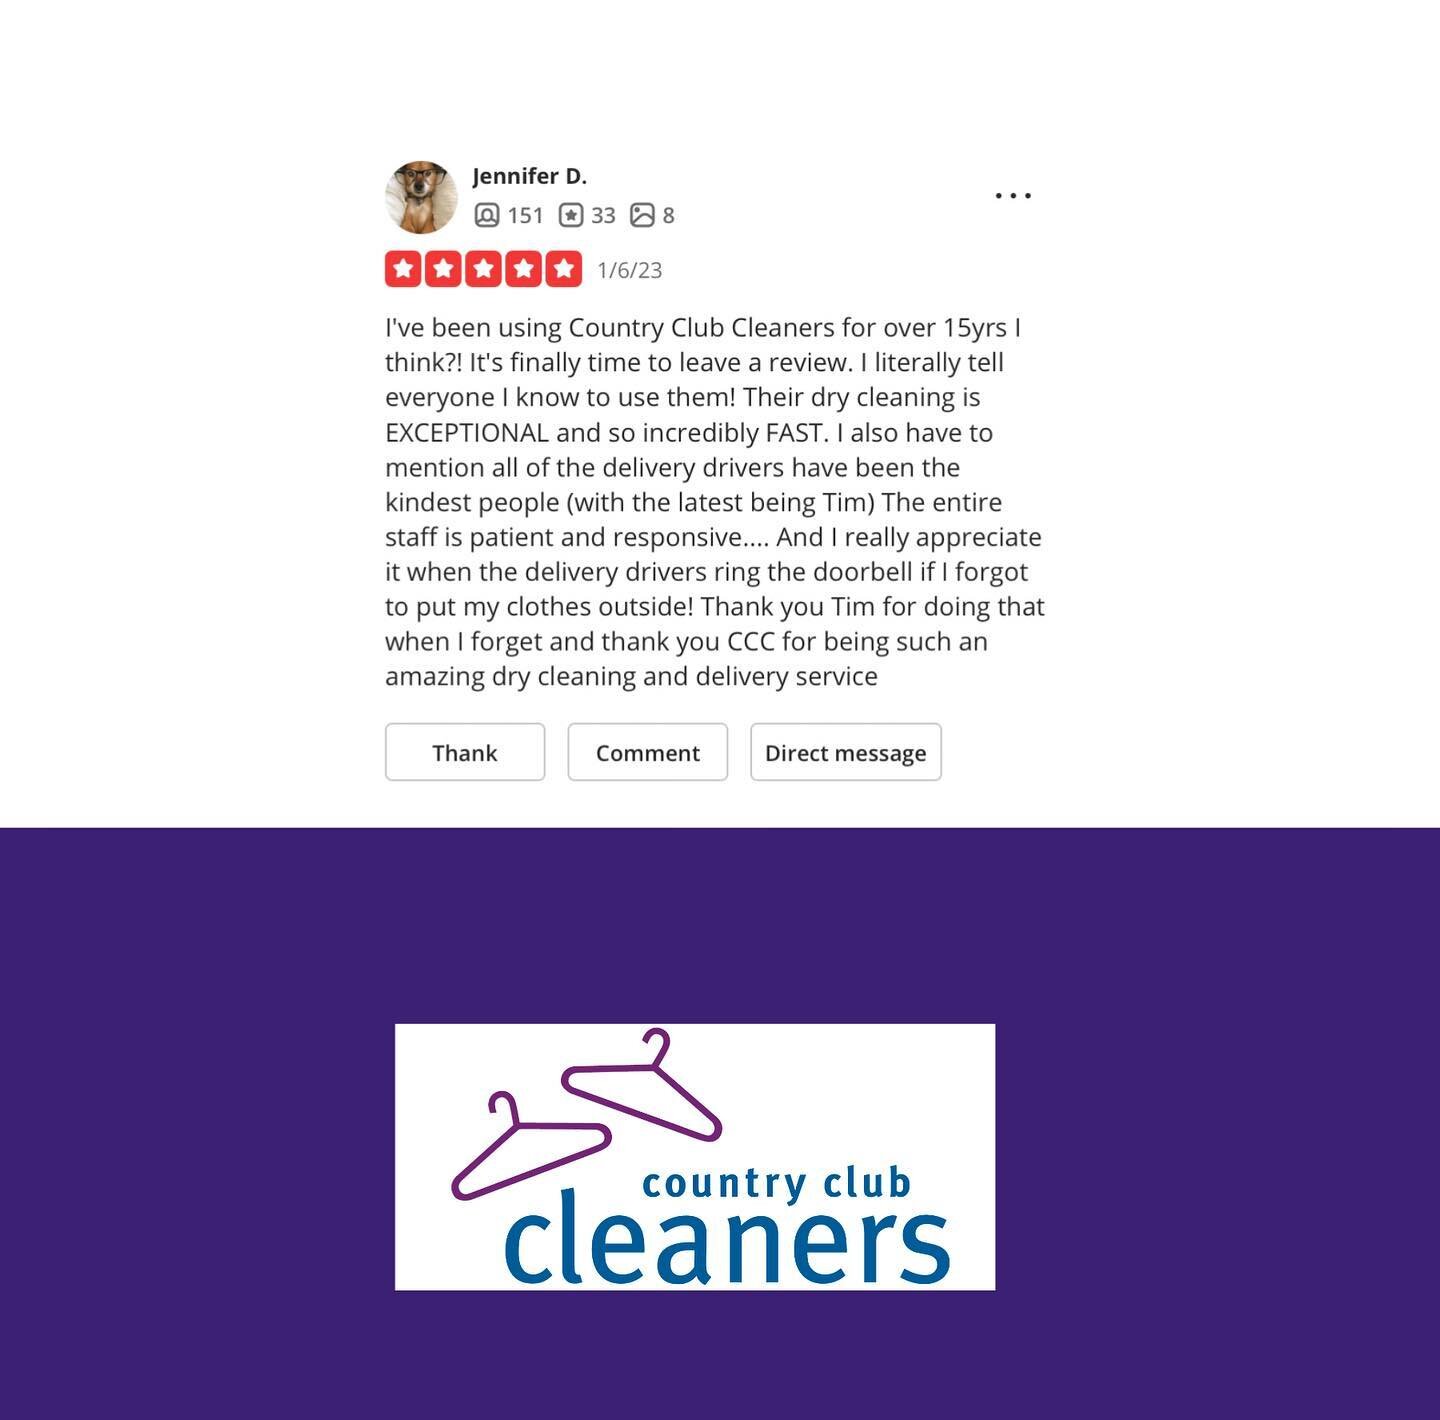 Thanks for the review Jennifer! https://m.yelp.com/biz/country-club-cleaners-san-ramon